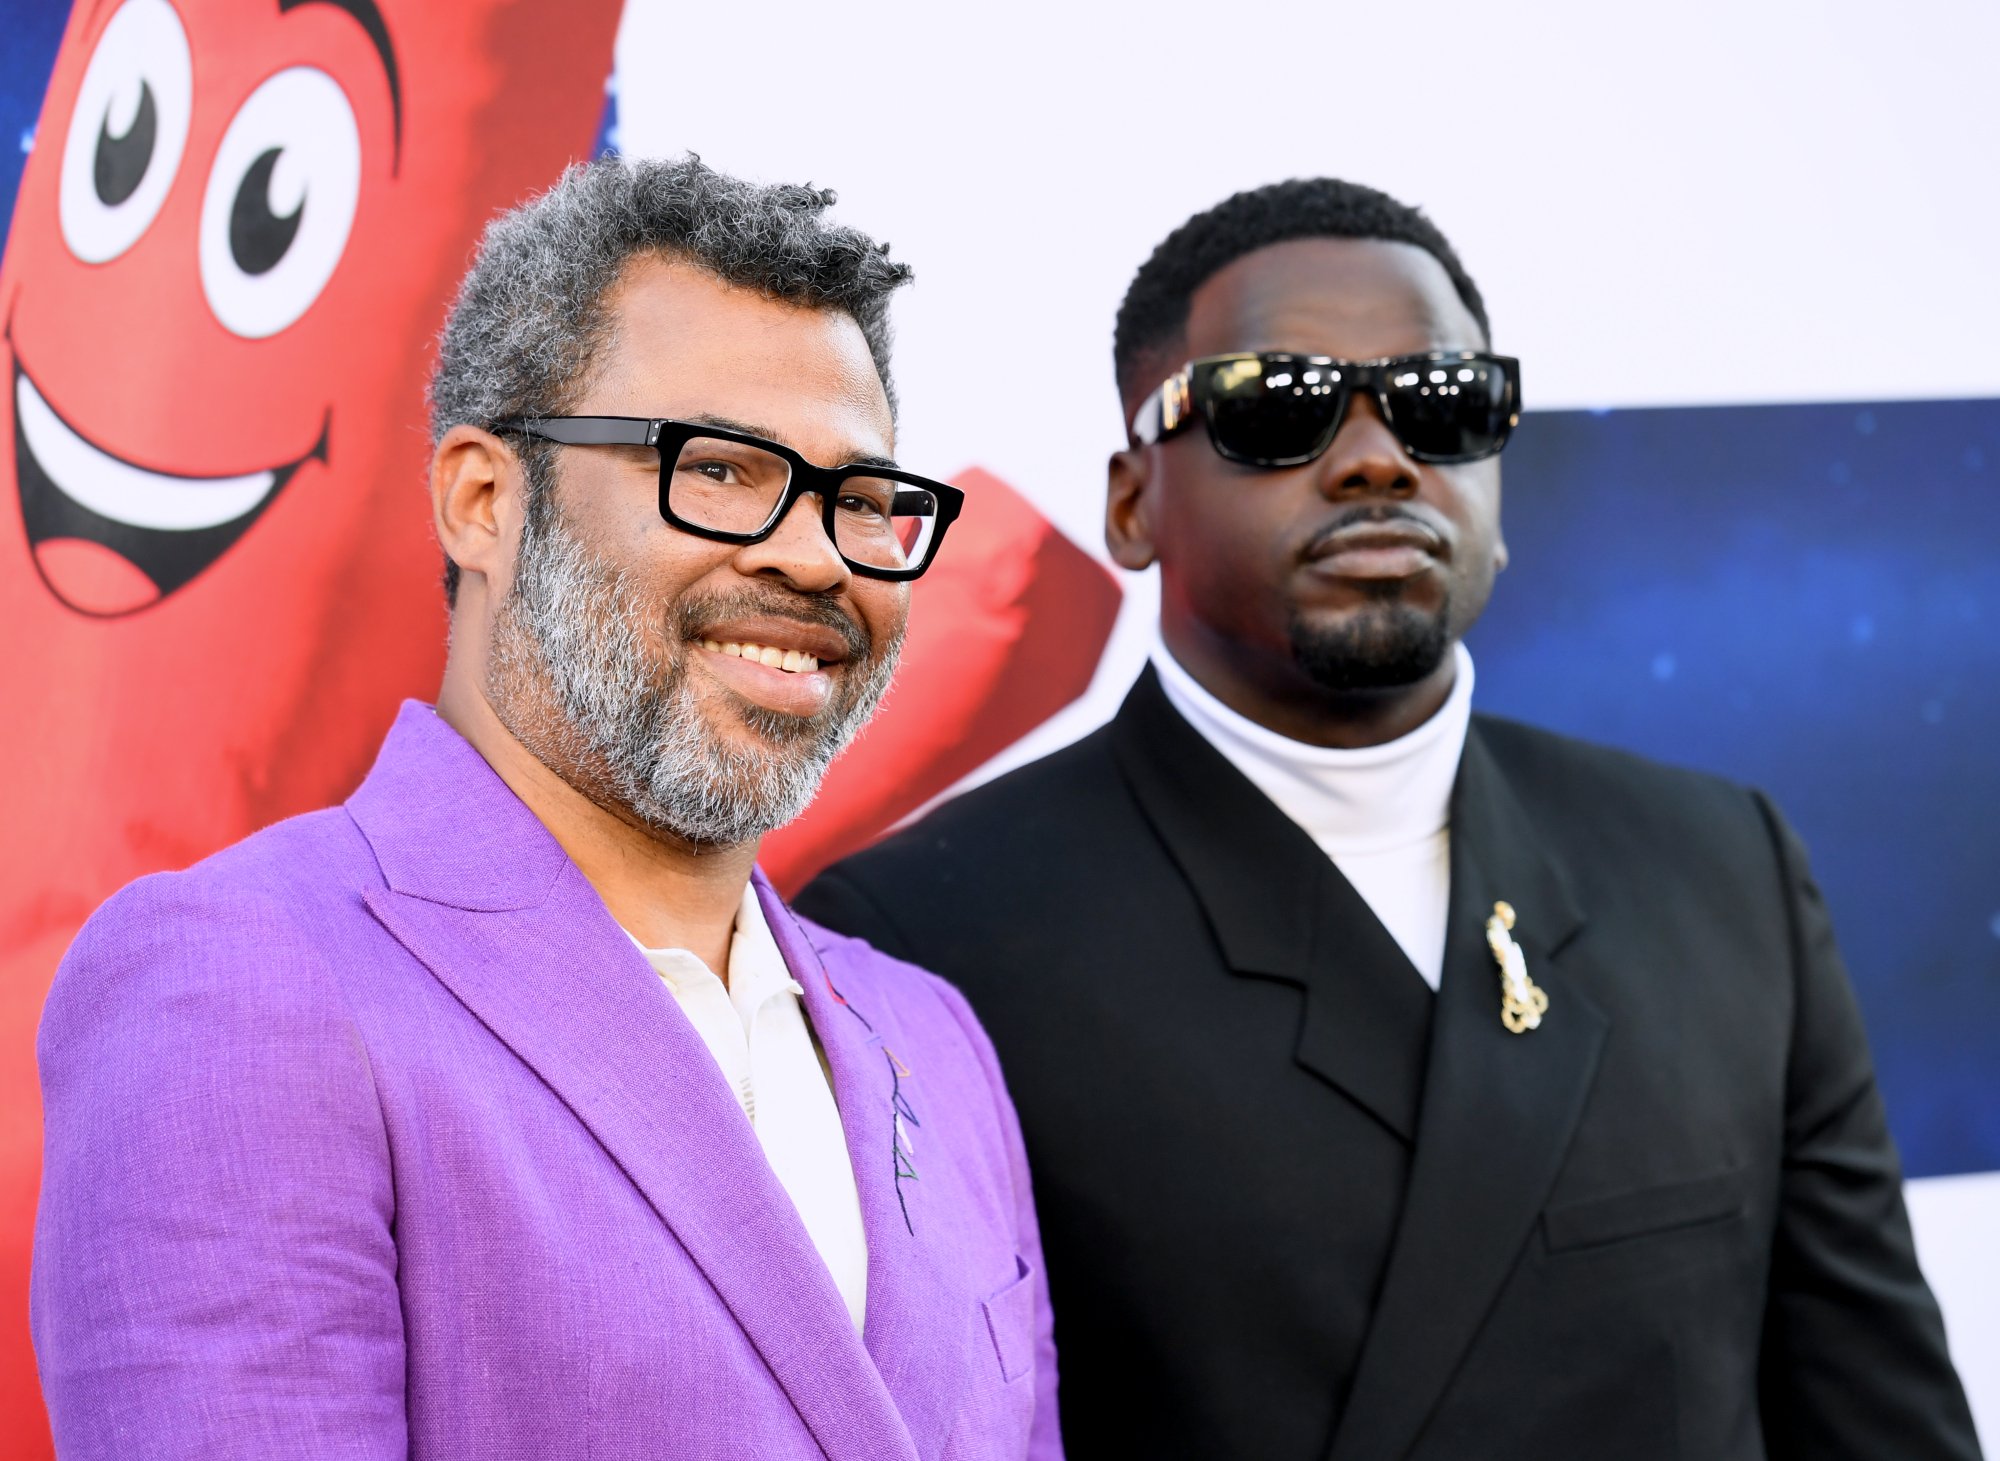 Jordan Peele and Daniel Kaluuya standing next to each other in purple and black suits, respectively. Peele is smiling and Kaluuya has a straight face as they stand in front of a waving inflatable arms man.